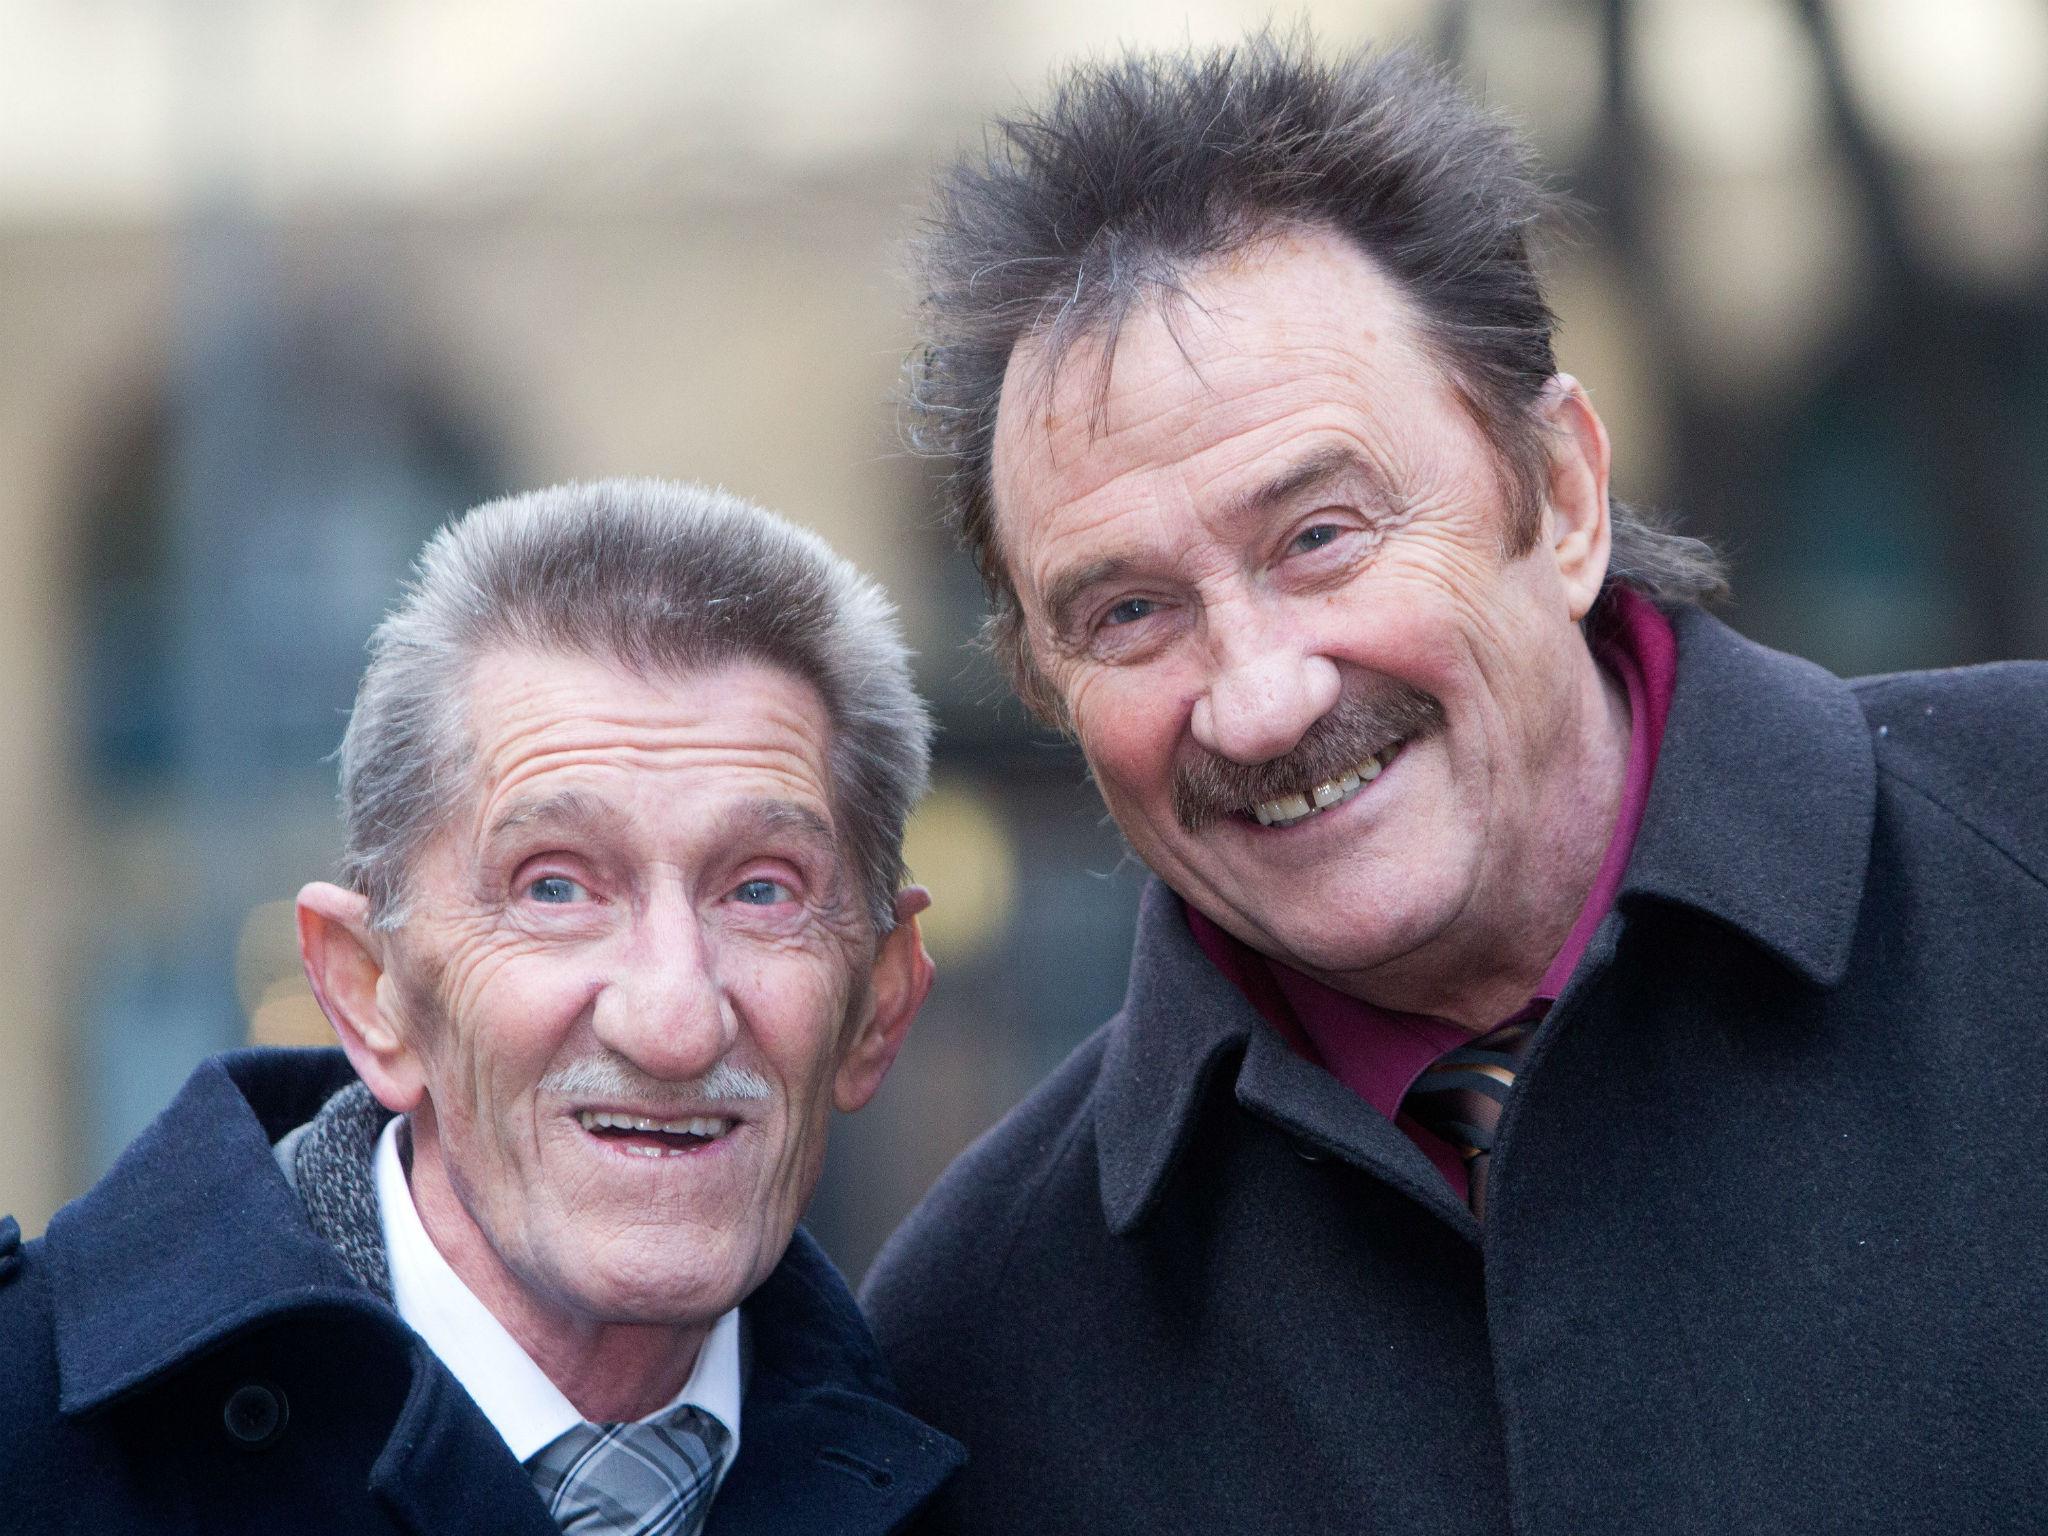 The Chuckle Brothers were famous for the children's TV show 'ChuckleVision'